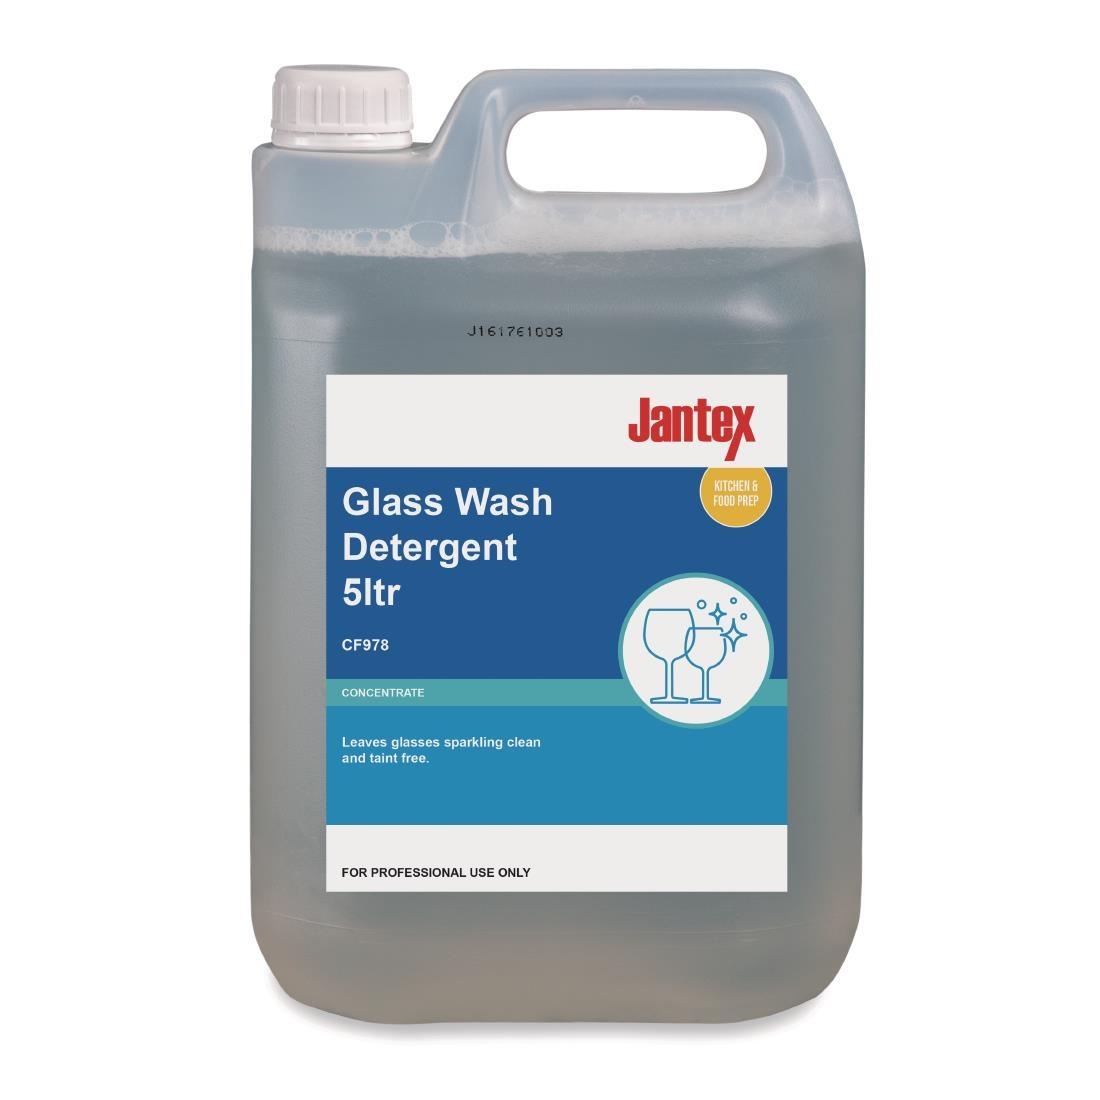 Jantex Glasswasher Detergent and Rinse Aid Concentrate 5Ltr (2 Pack) - SA487  - 2